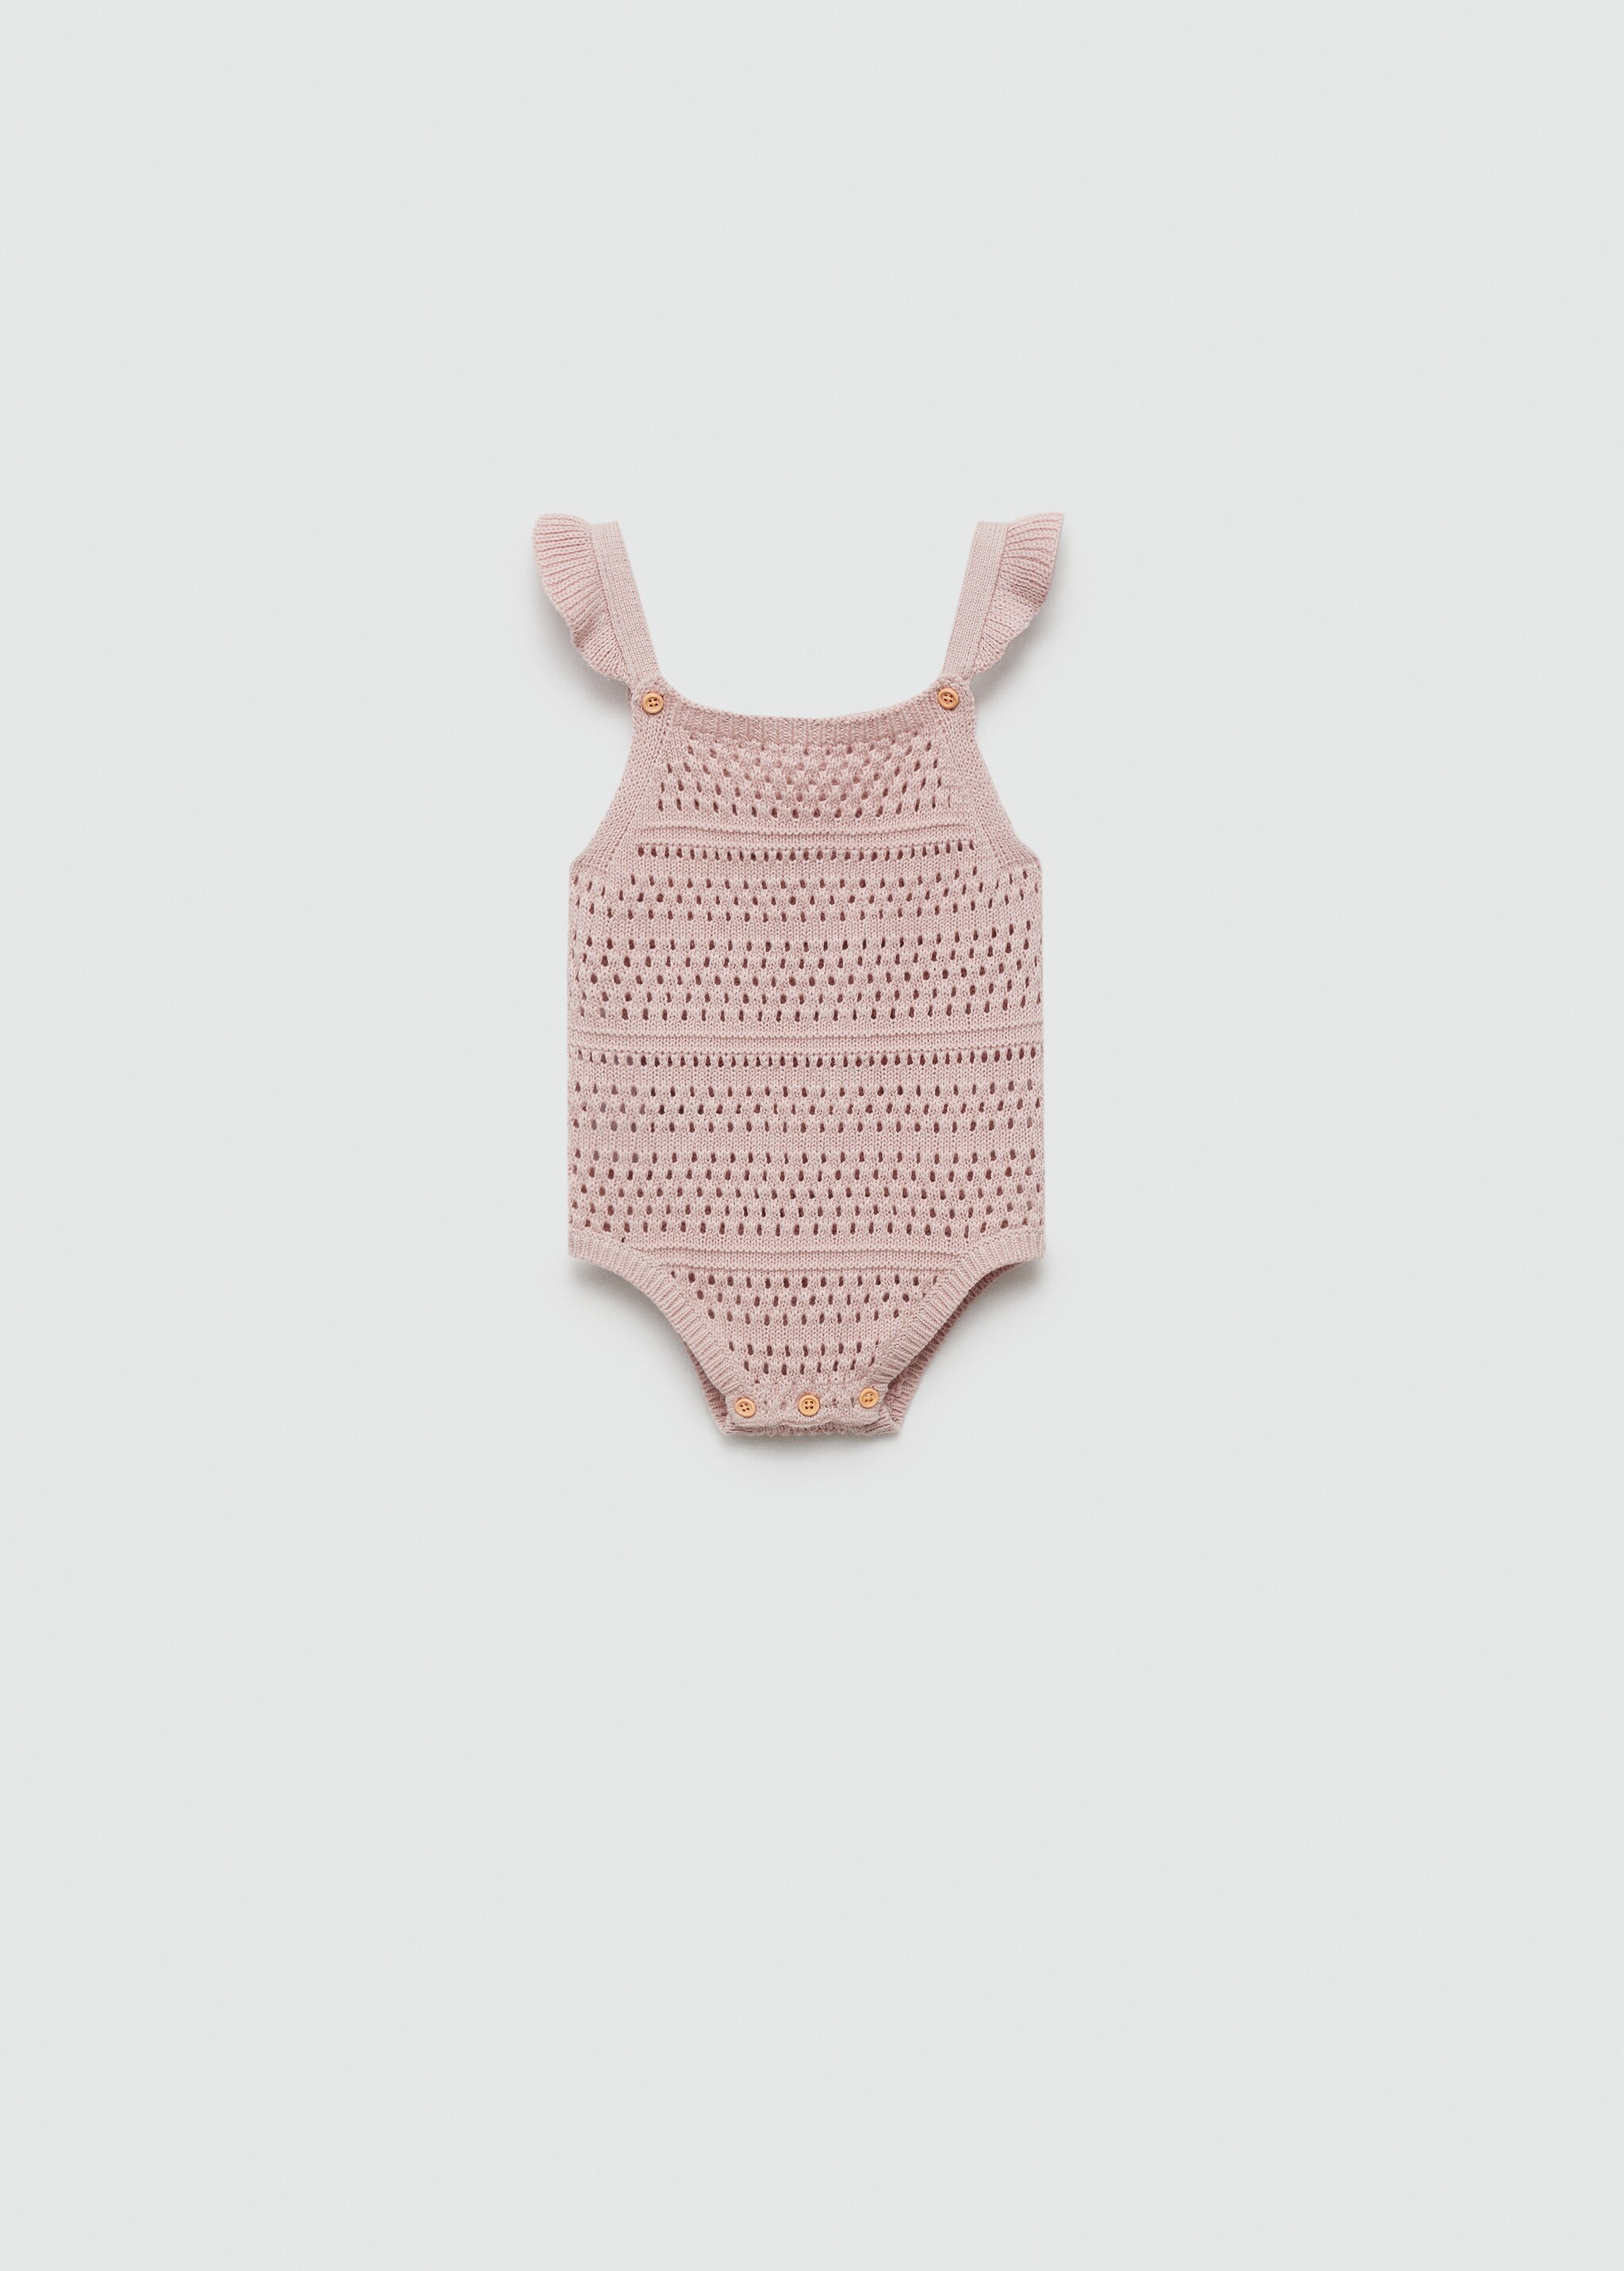 Cotton openwork knitted romper - Article without model